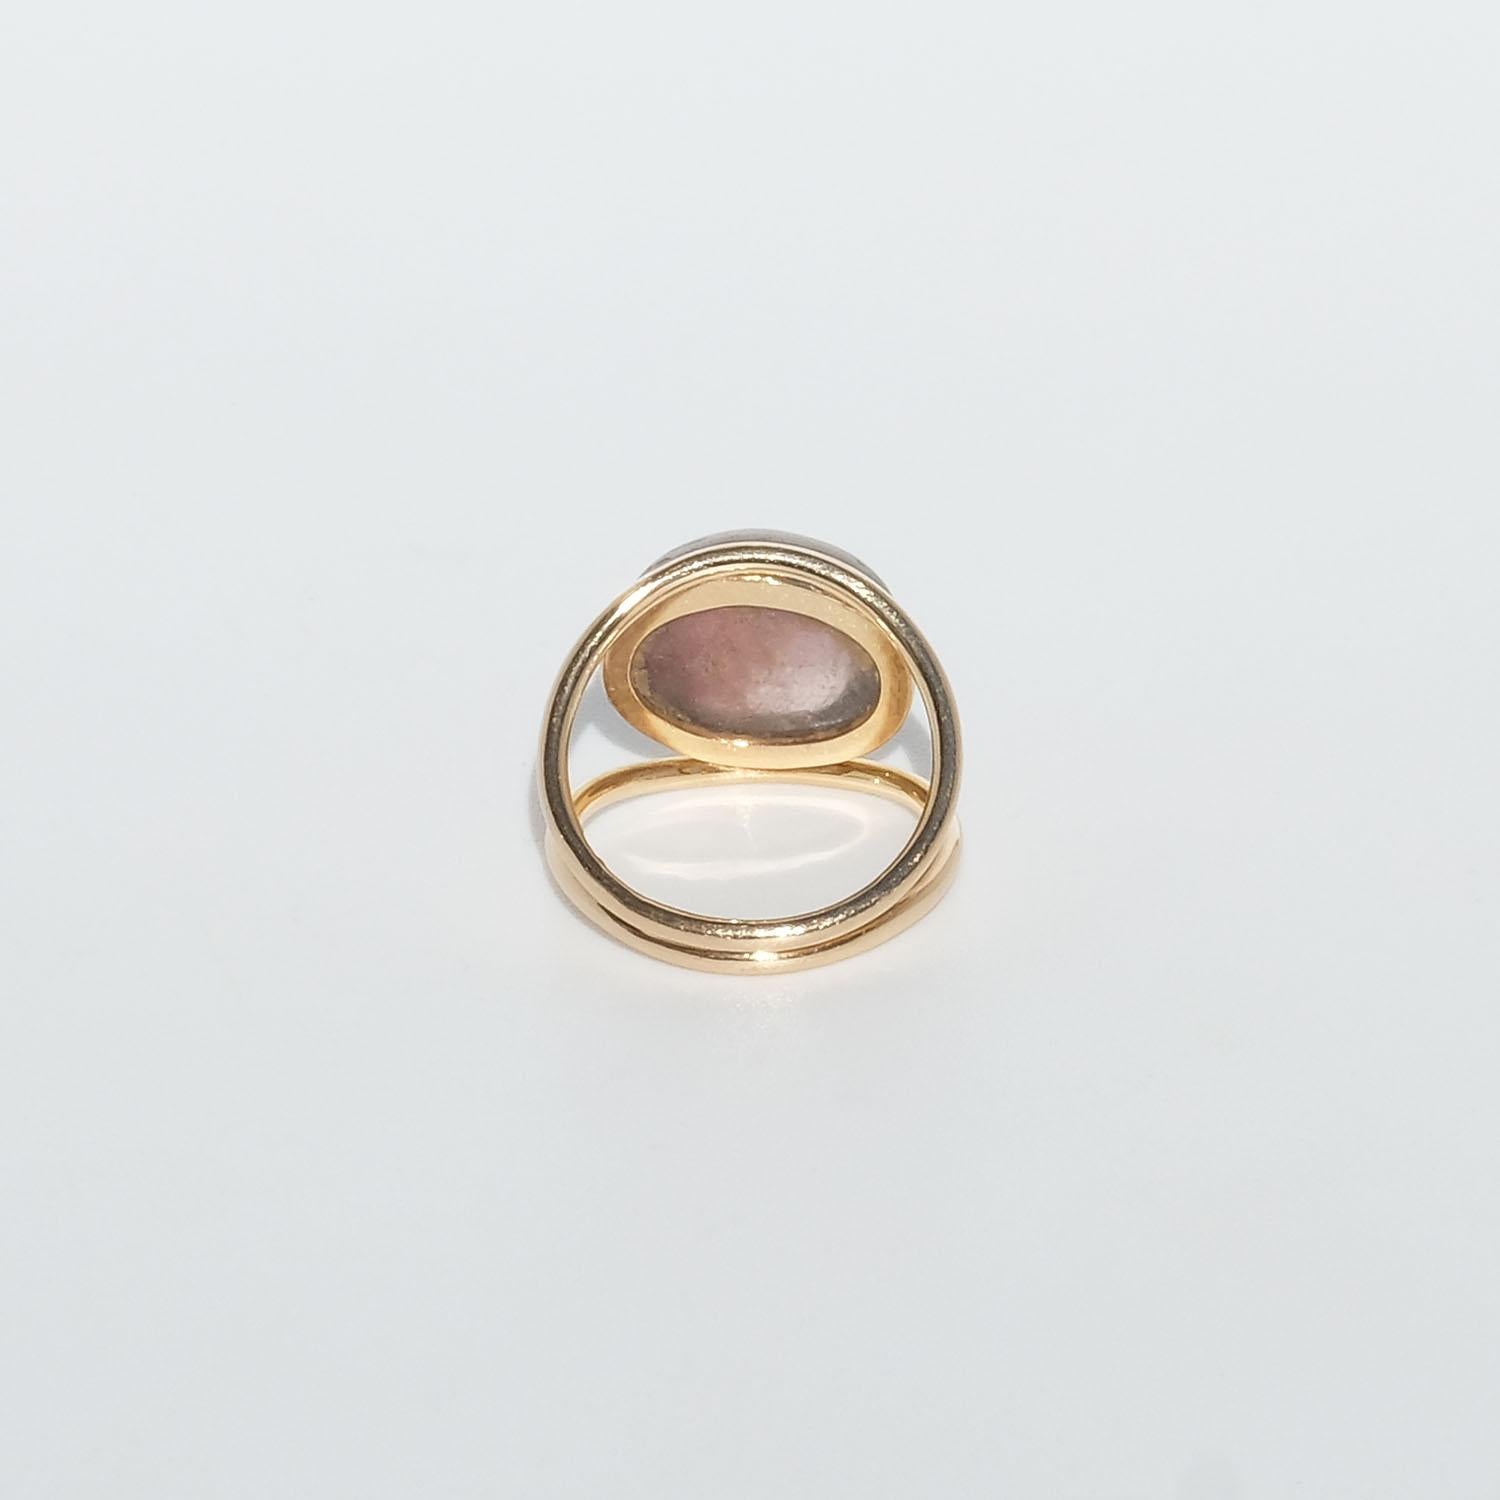 Vintage 18k Gold and Pink Tourmaline Ring by Swedish Master Rey Urban Year 1961 In Good Condition For Sale In Stockholm, SE